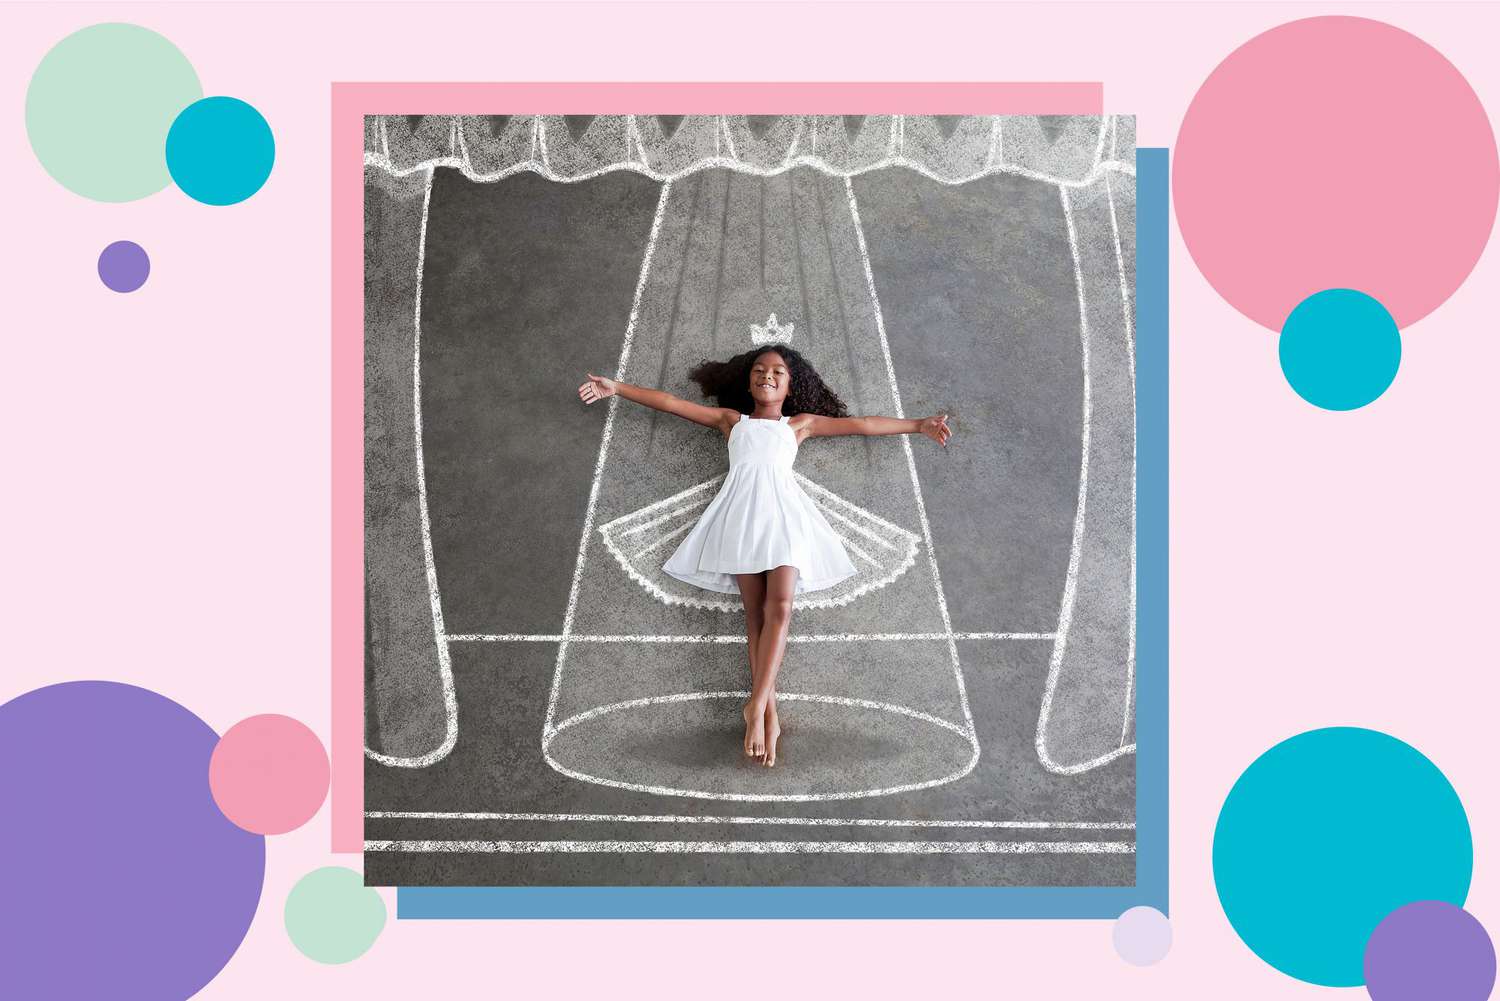 young girl in white dress imagines dancing as a ballerina on a chalkboard stage